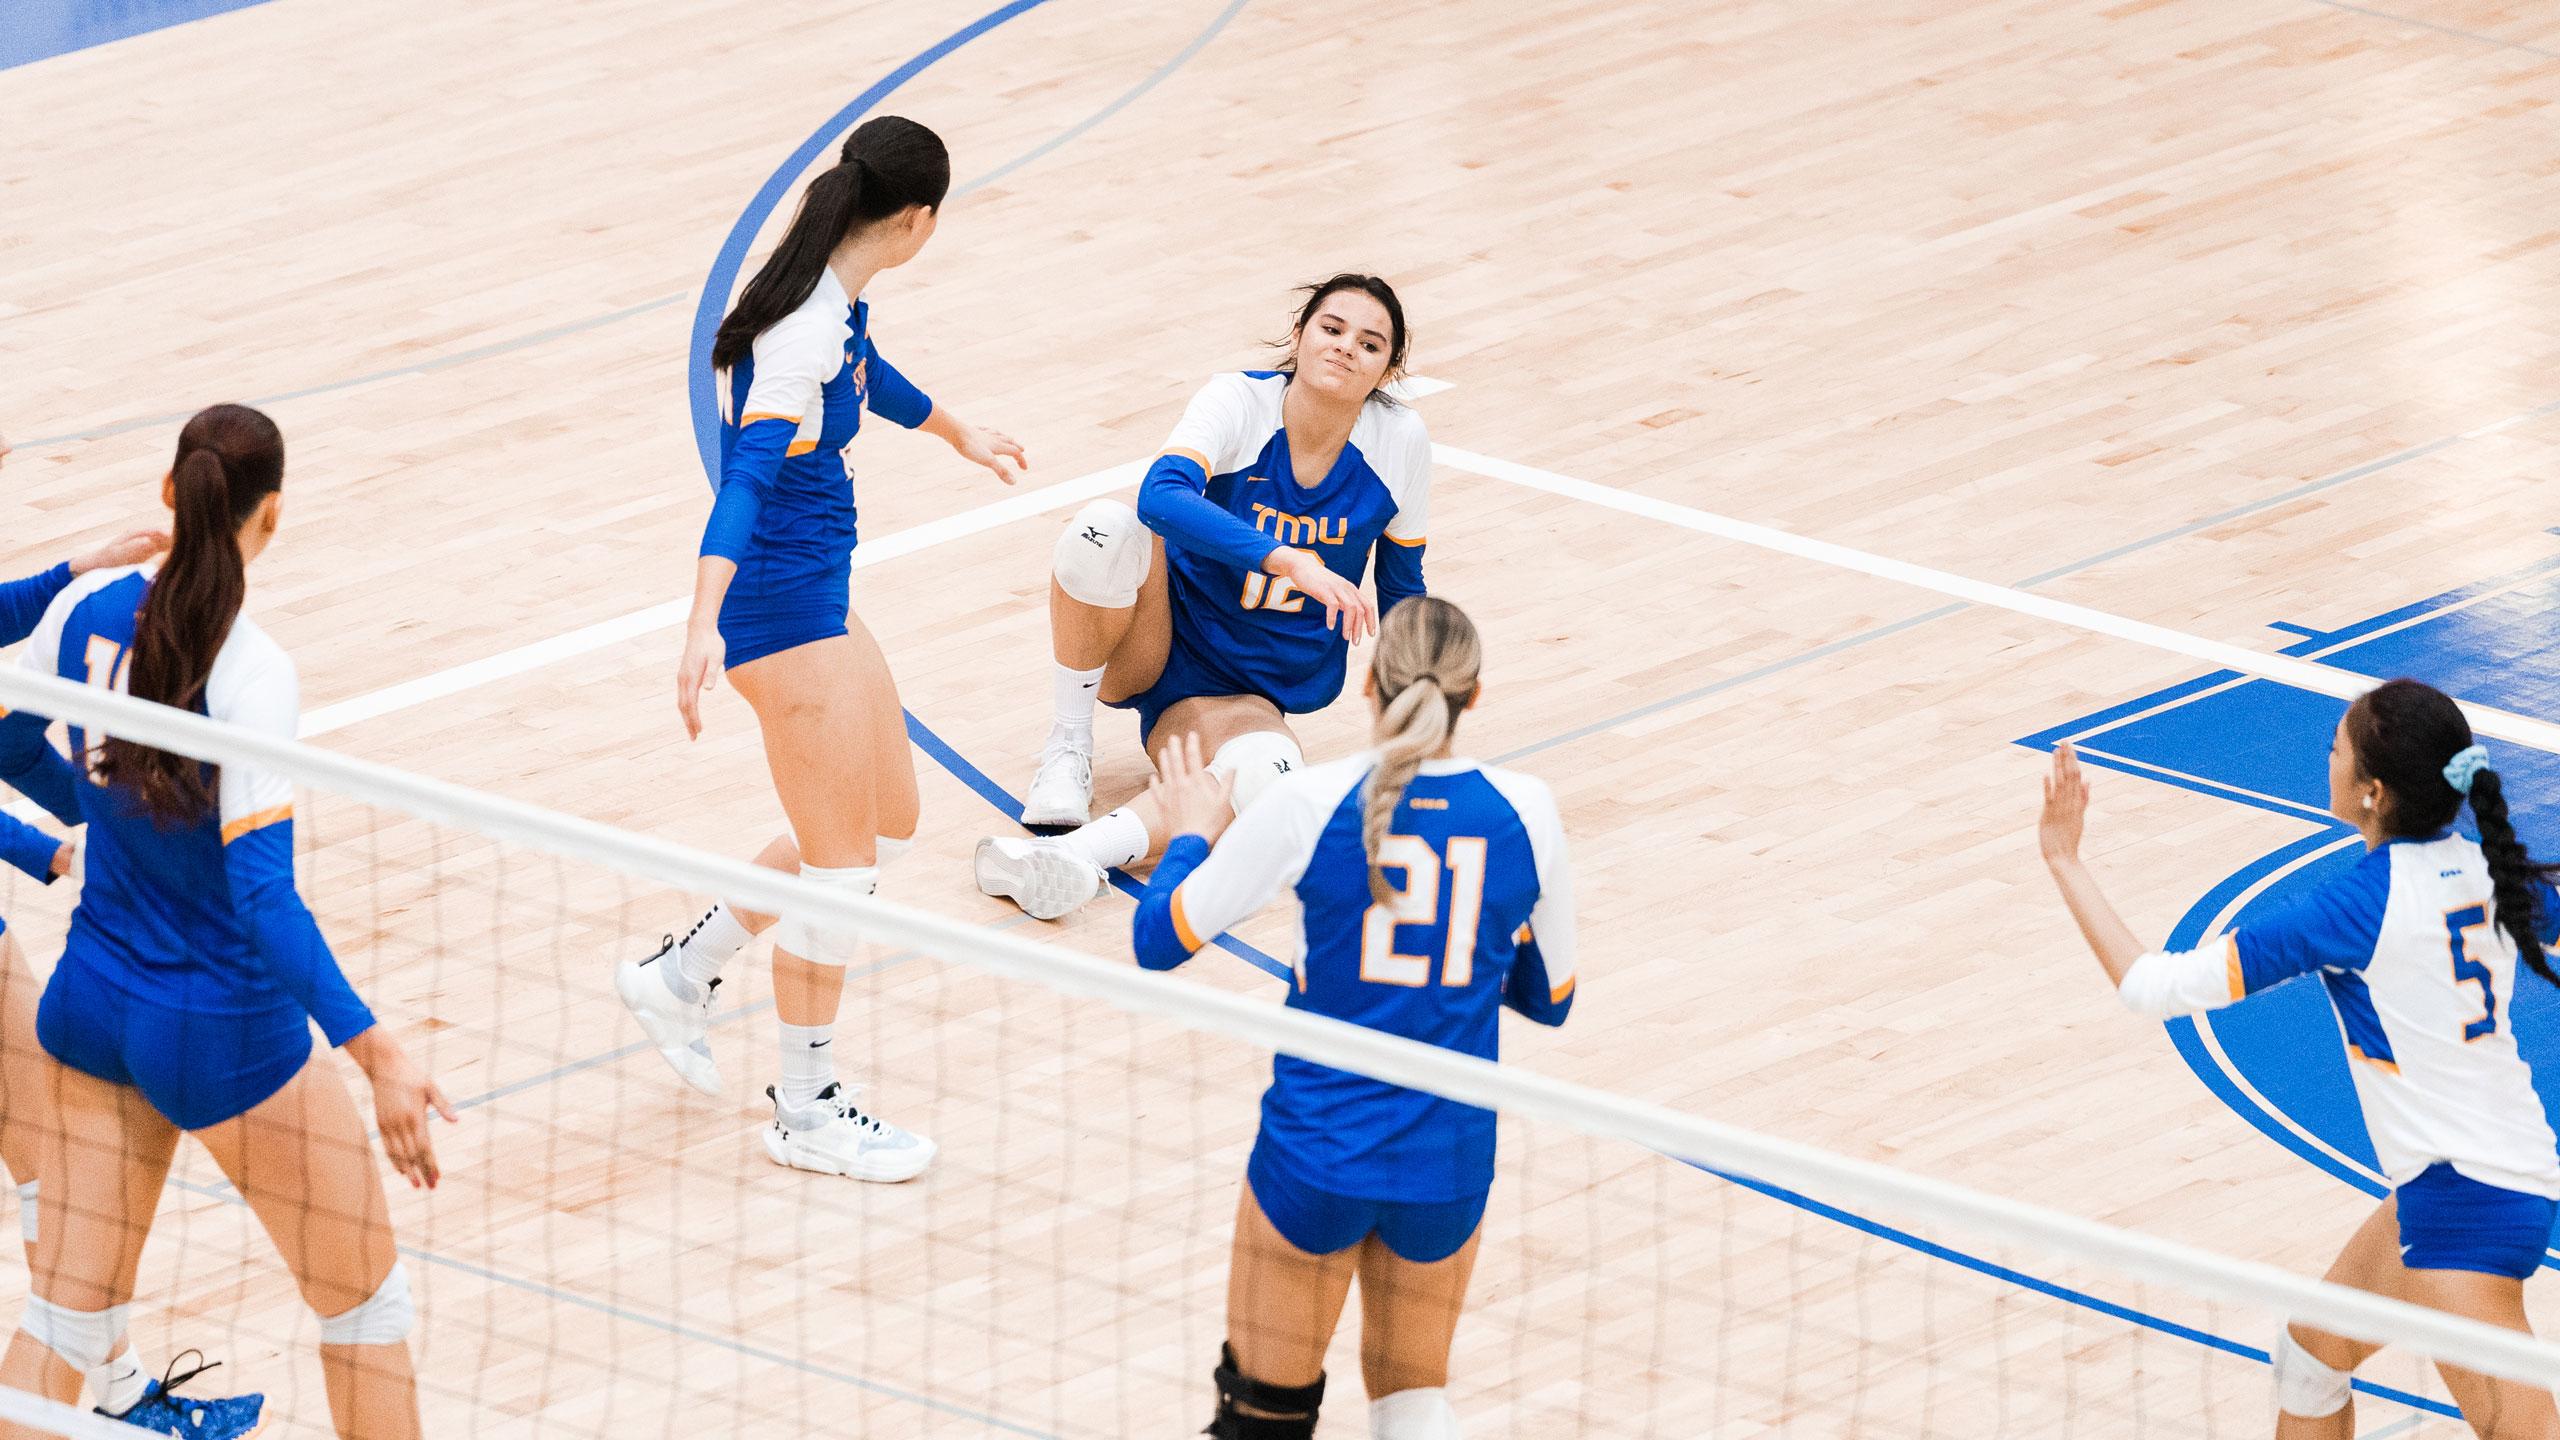 The TMU women's volleyball team helps up their teammate in blue jerseys